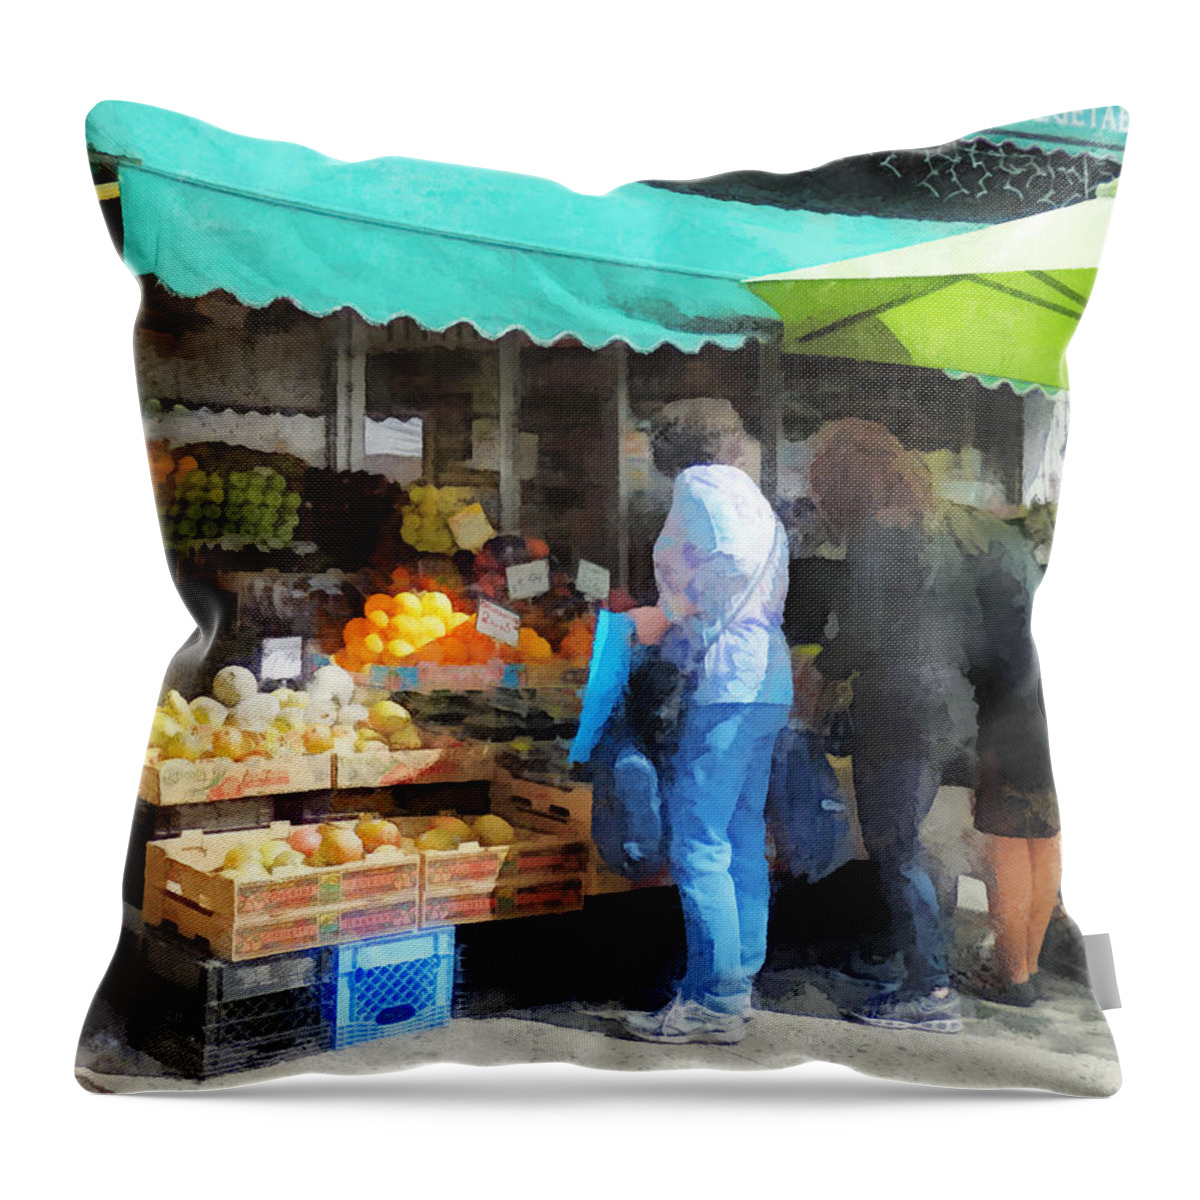 Fruit Throw Pillow featuring the photograph Hoboken NJ - Fruit For Sale by Susan Savad